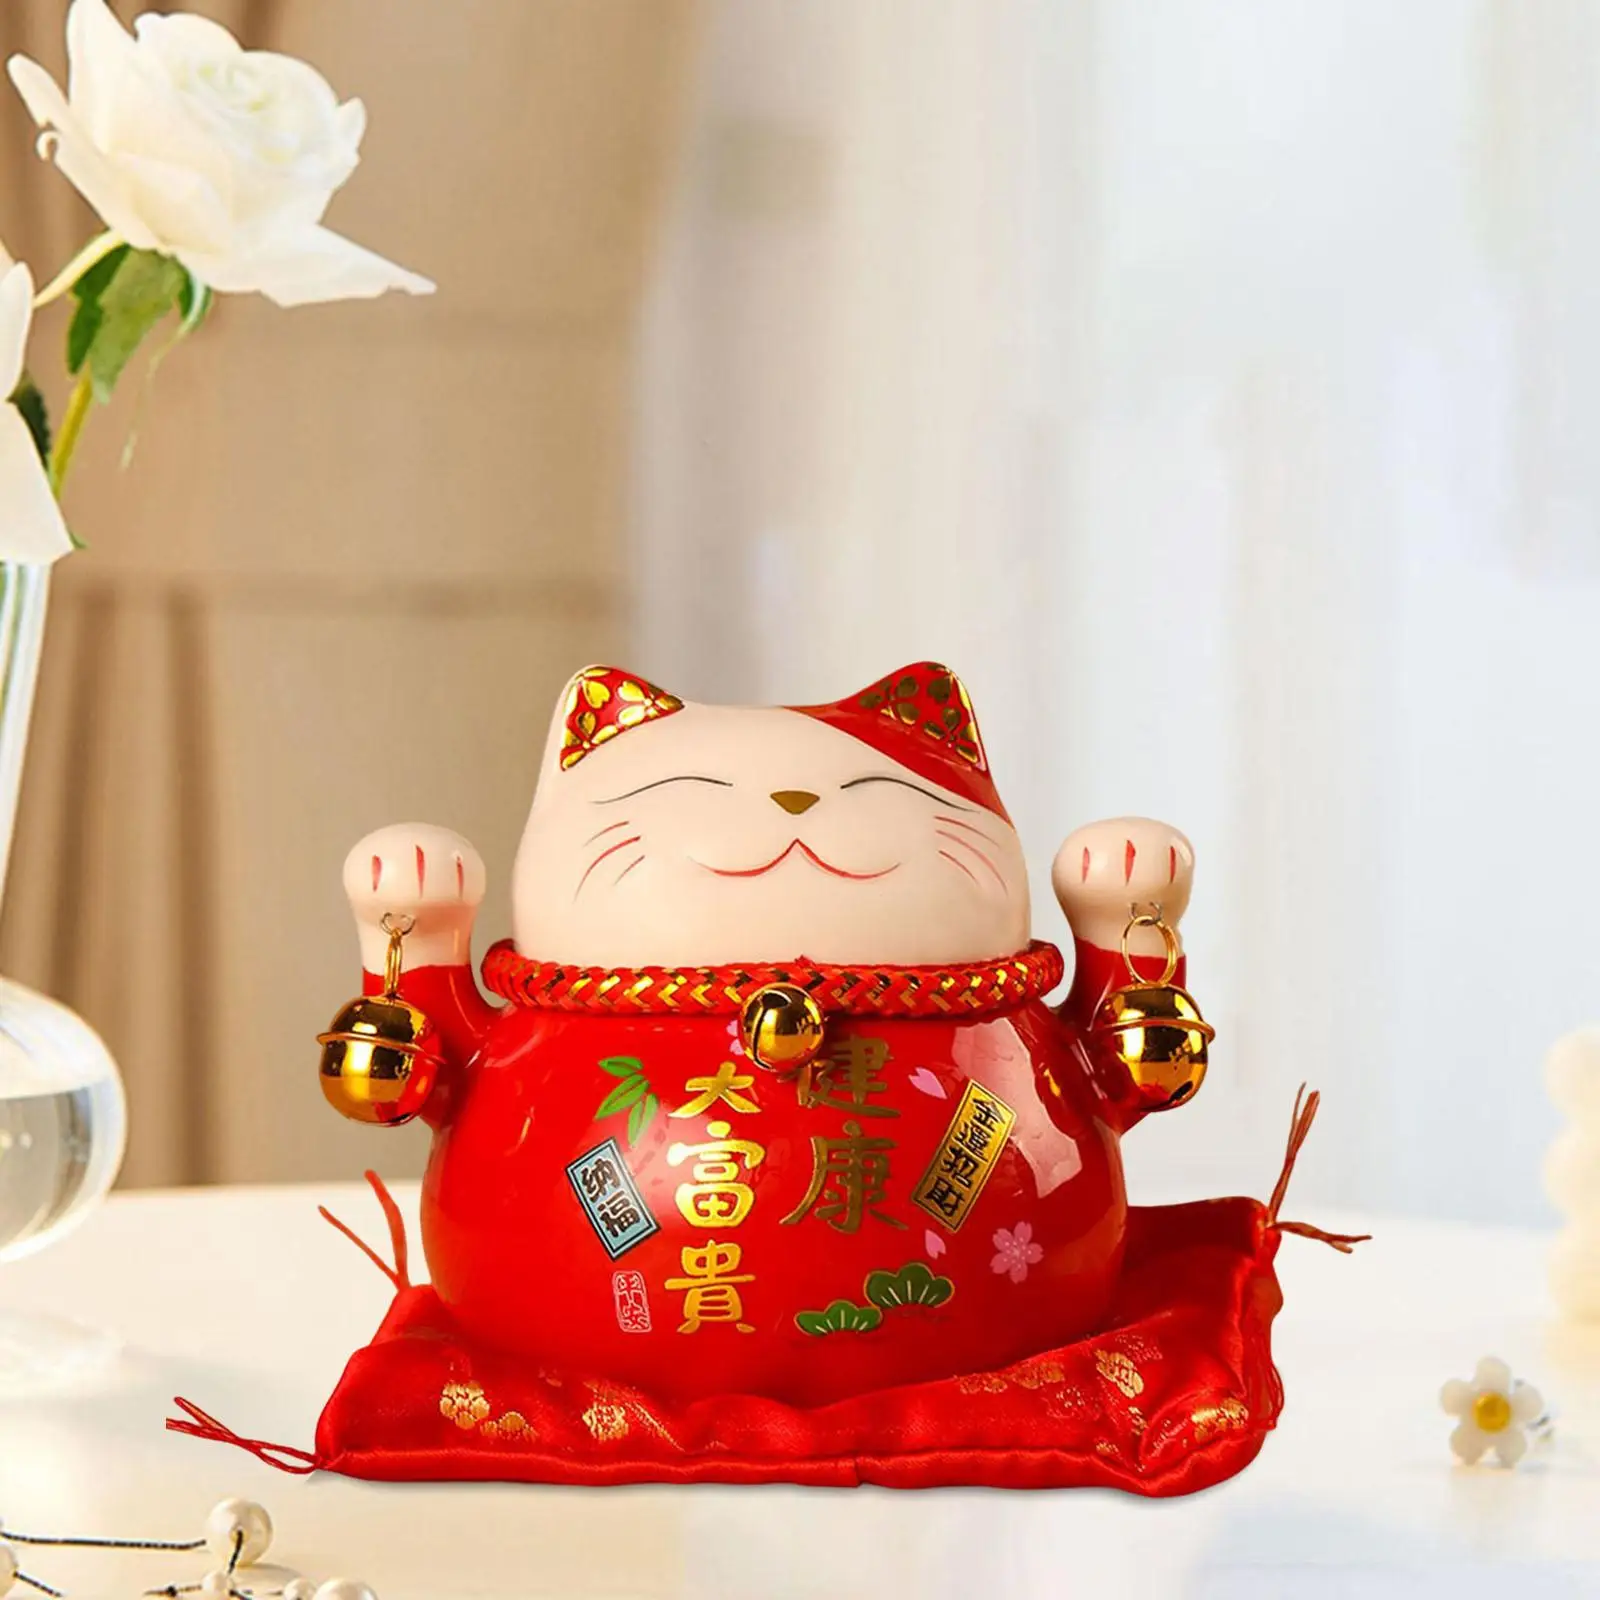 Feng Shui Lucky Cat Money Bank Statues Art Decor Decoration Crafts Storage Money Box Ceramic for Business Presents Gift Office